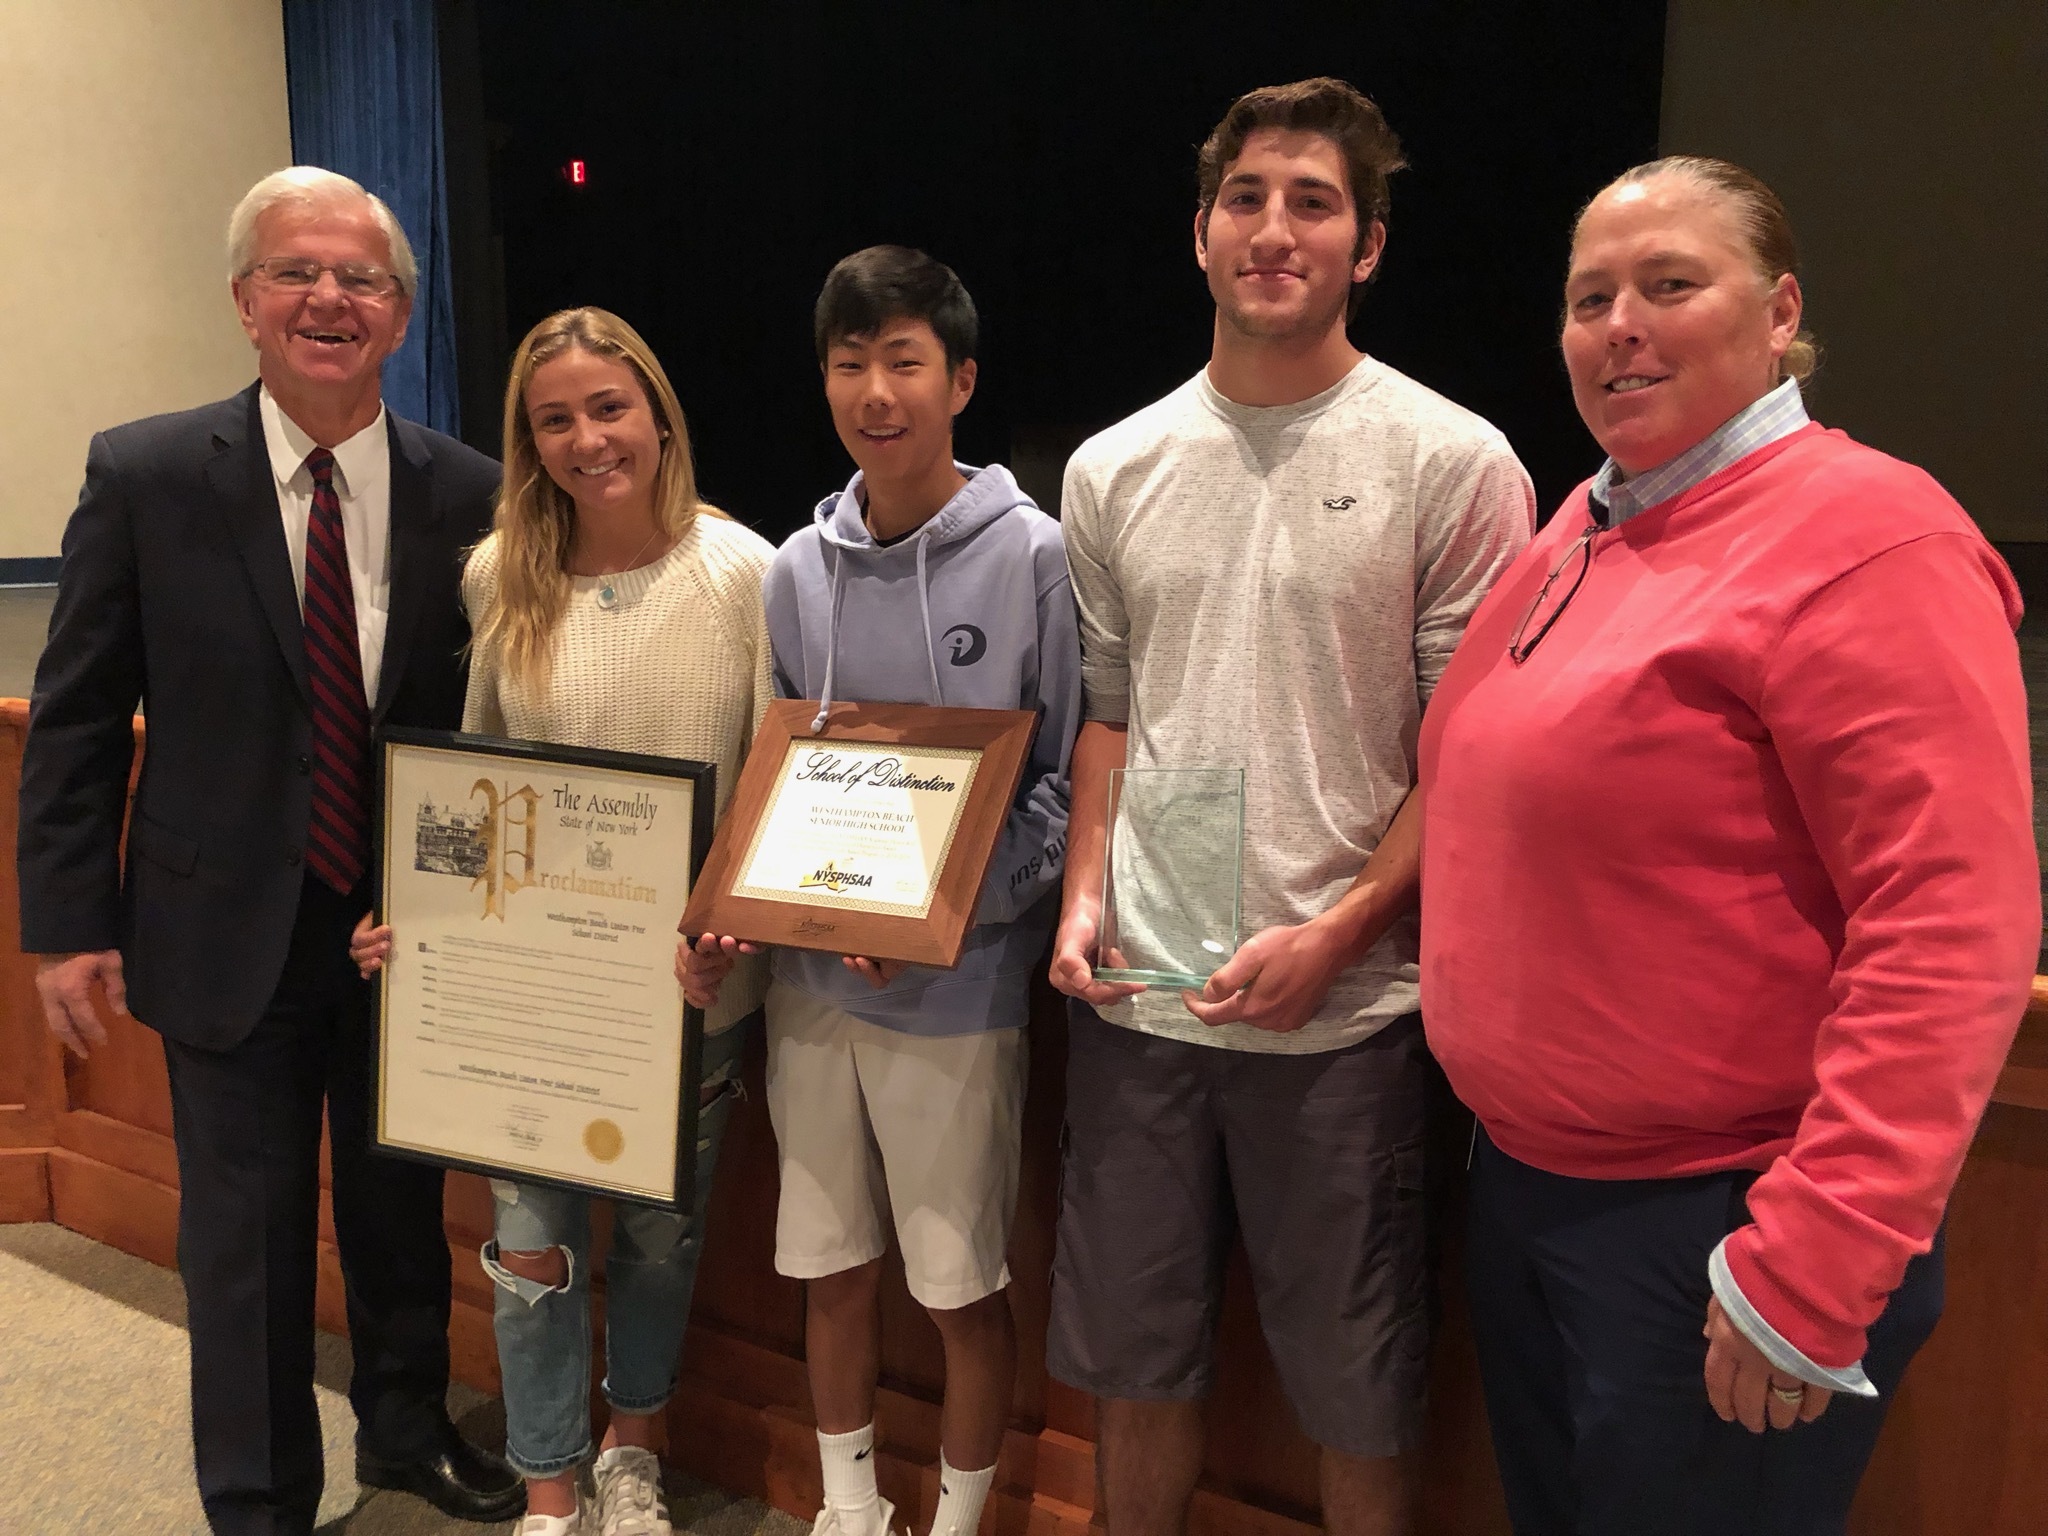 From left, New York State Assemblyman Fred W. Thiele Jr., Isabelle Smith, Mackenzie Kim, Jesse AlfanoStJohn and Westhampton Beach Athletic Director Kathy Masterson. Thiele  issued a proclamation recognizing the school for becoming a New York State Public High School Athletic Association “School of Distinction” in 2019.    CAILIN RILEY